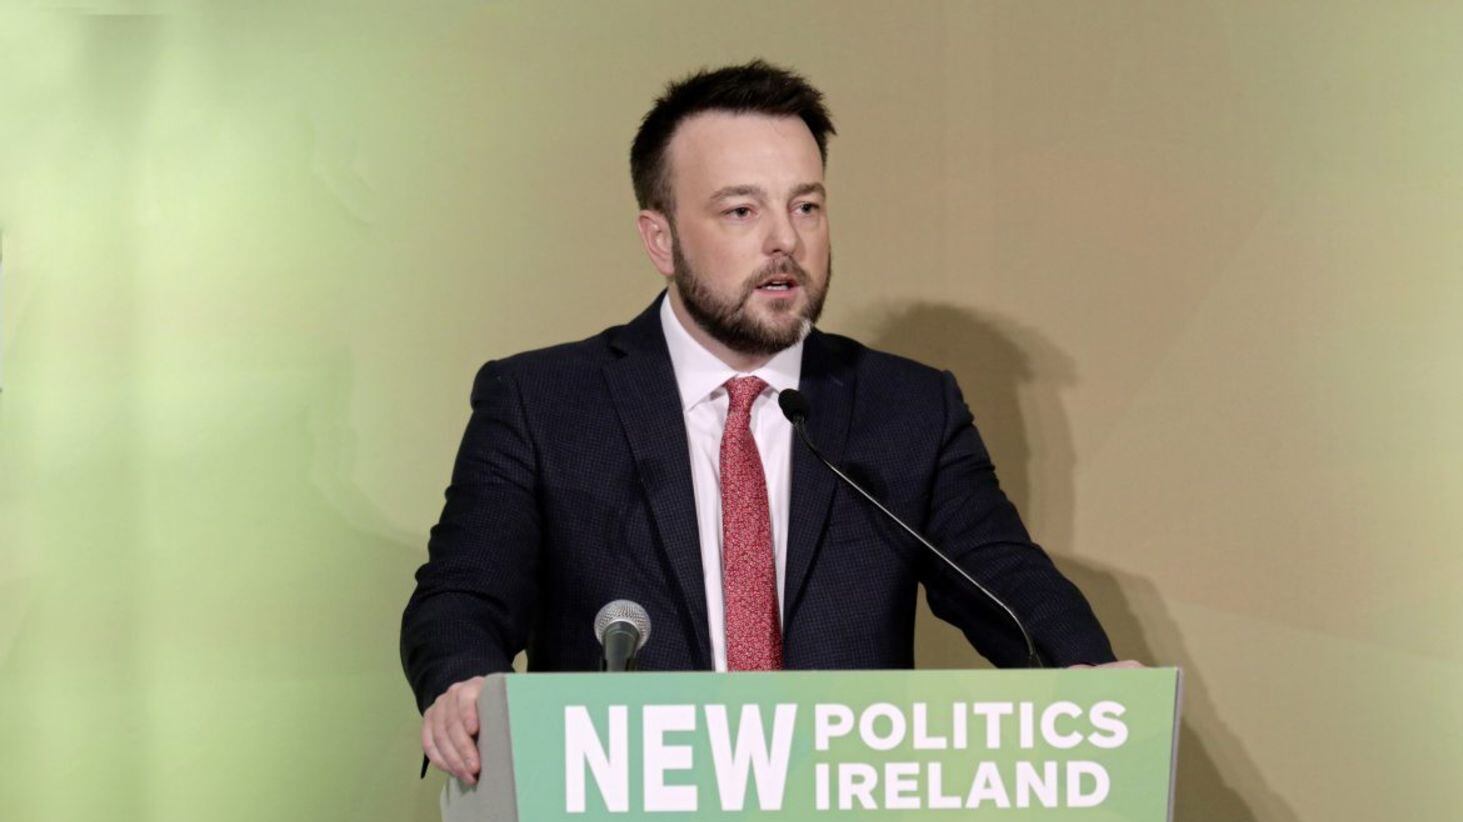 Colum Eastwood said nationalism needed to challenge itself. Picture by Declan Roughan/Press Eye  